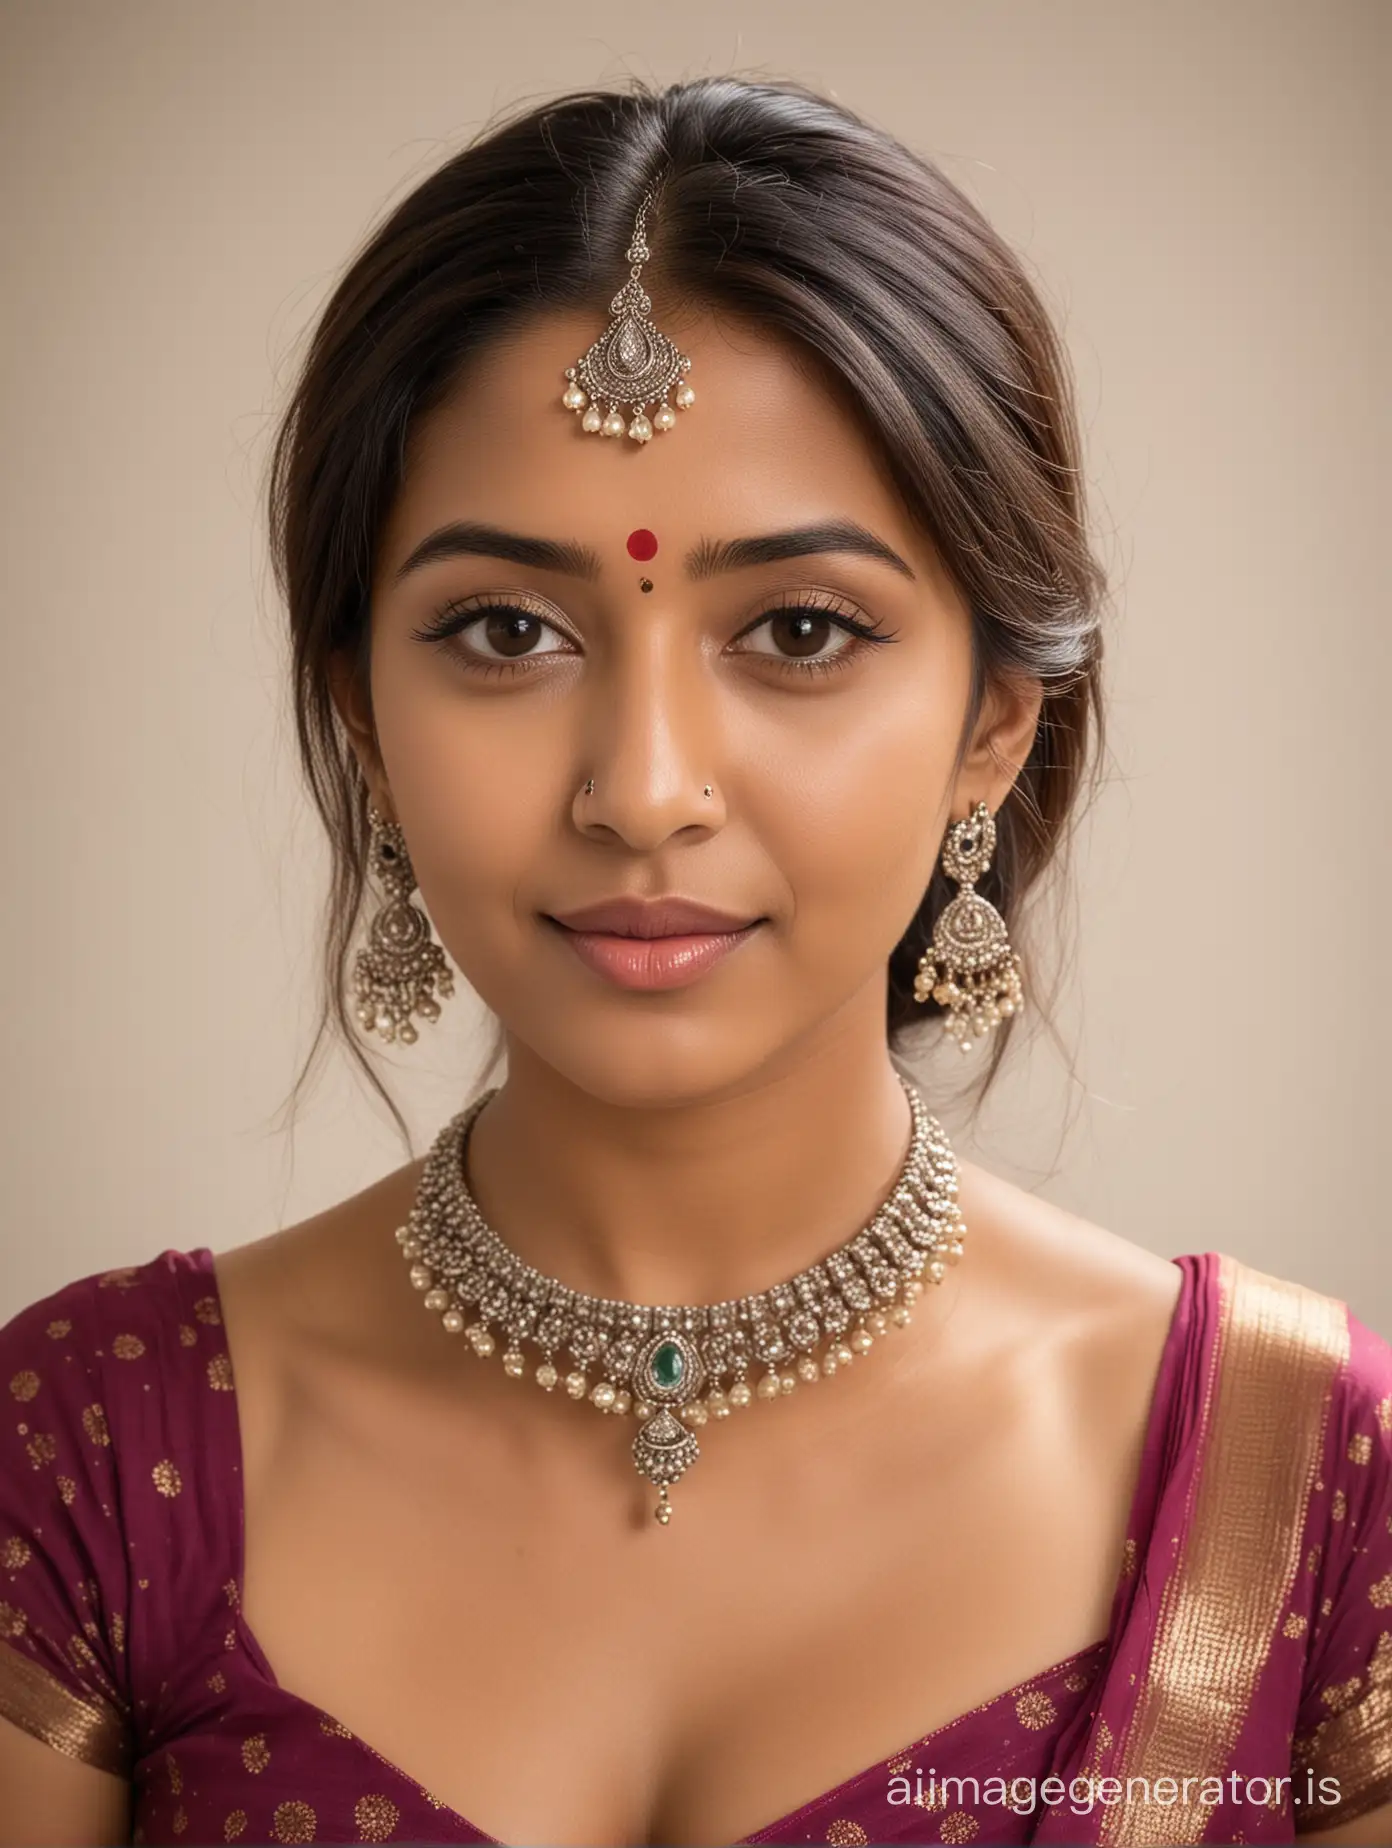 Elegant-Indian-Housewife-Nude-with-Traditional-Bindis-and-Ornate-Jewelry